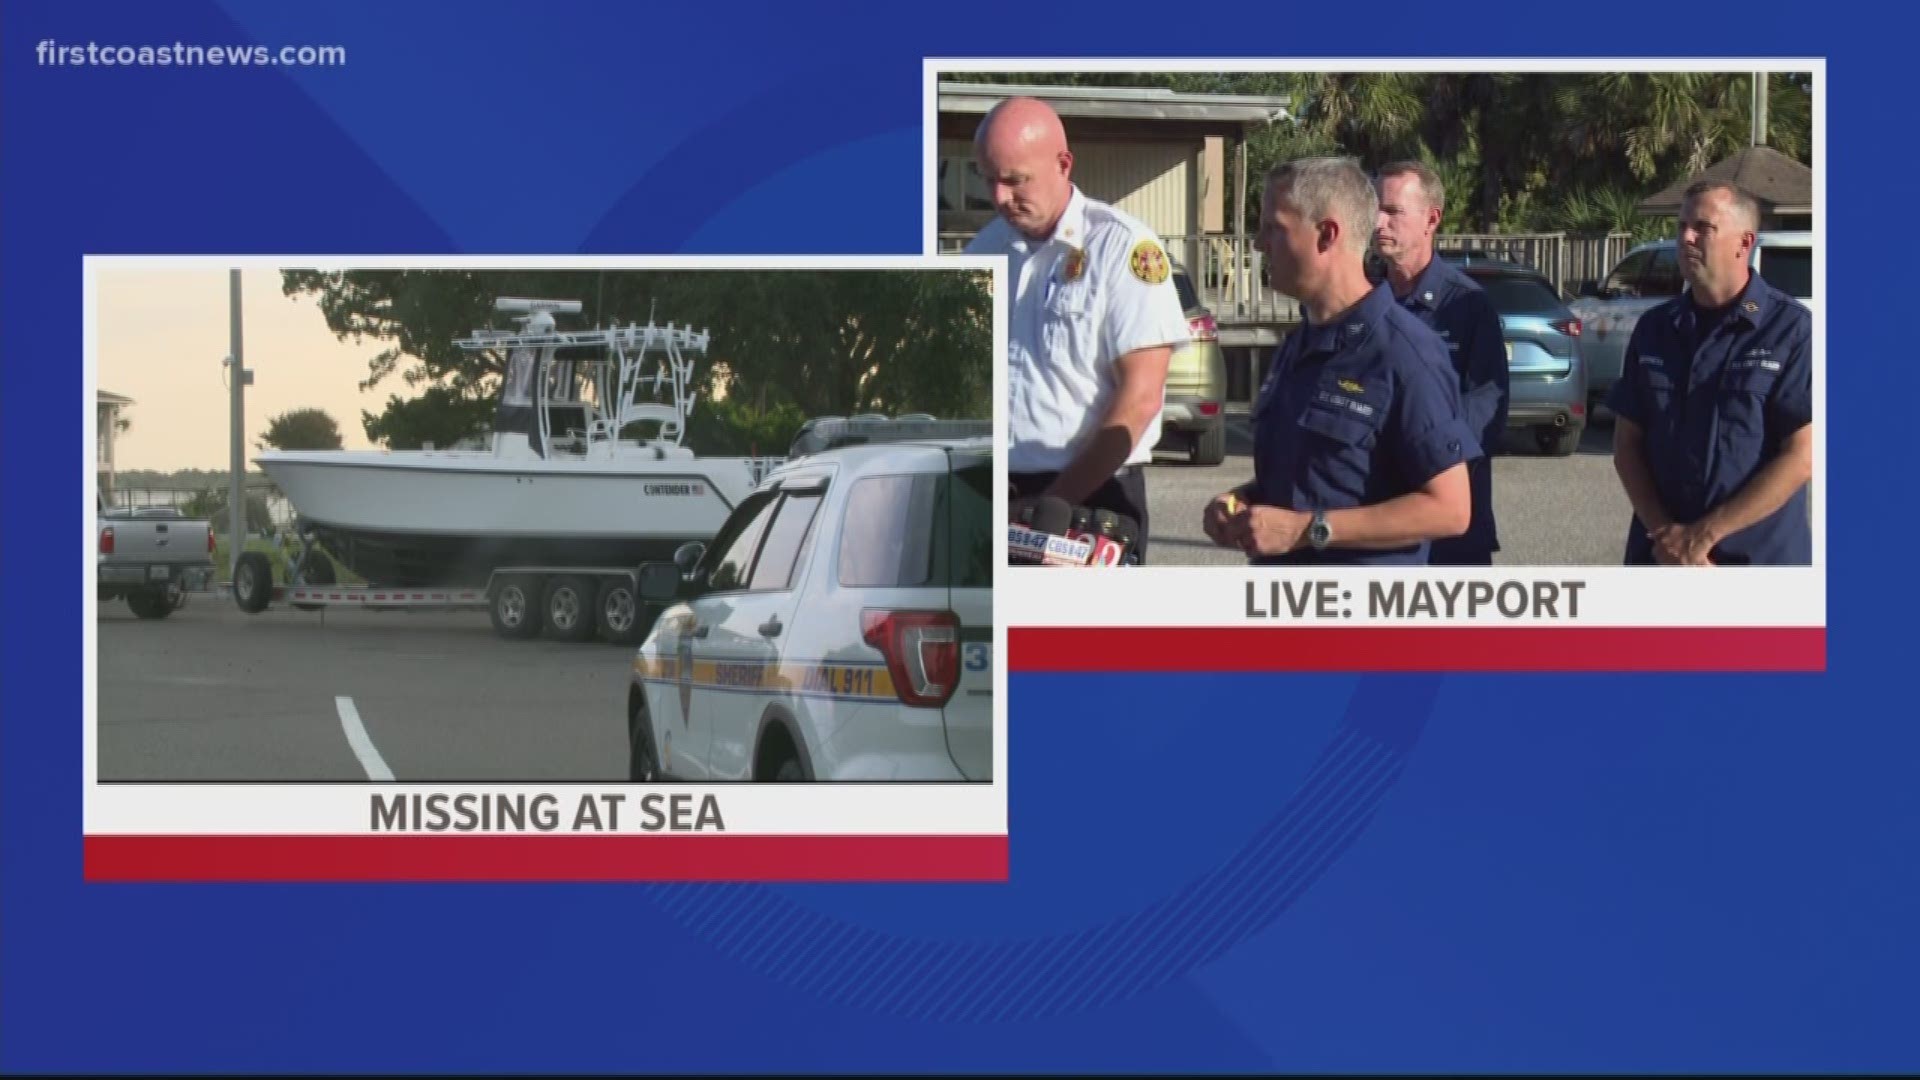 The firefighters, Brian McCluney and Justin Walker were last seen leaving the 200 Christopher Columbus boaty ramp on Friday. Searchers are still optimistic but they say they are in a race against time.